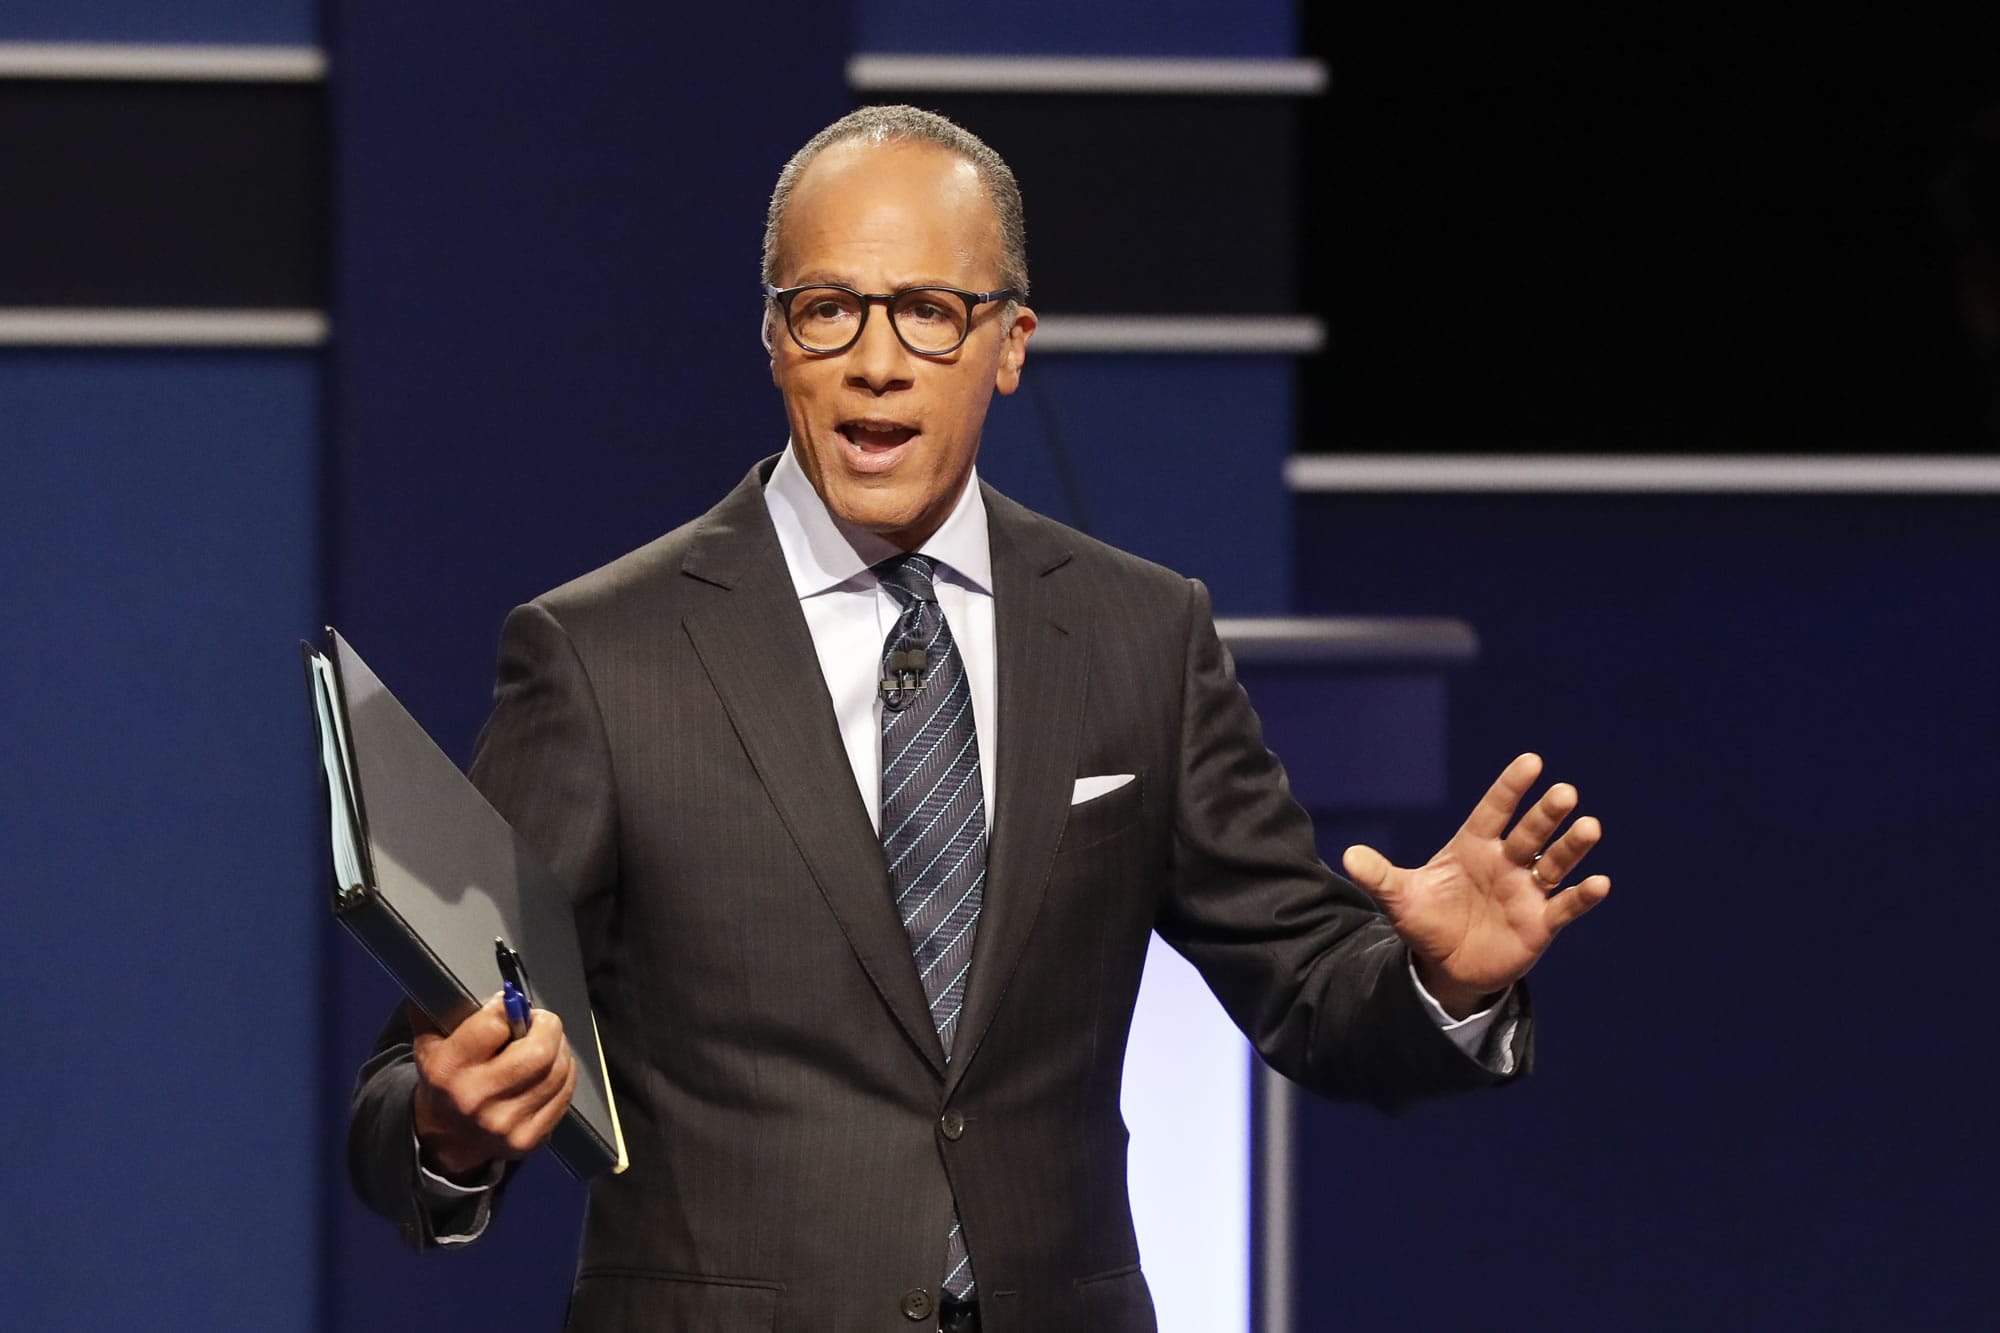 FILE - In this Sept. 26, 2016, file photo, moderator Lester Holt, anchor of NBC Nightly News, talks with audience before the presidential debate at Hofstra University in Hempstead, N.Y. On Feb. 21, 2017, Holt met a 7-year-old boy who mentioned him to a local news reporter in Portland, Oregon.